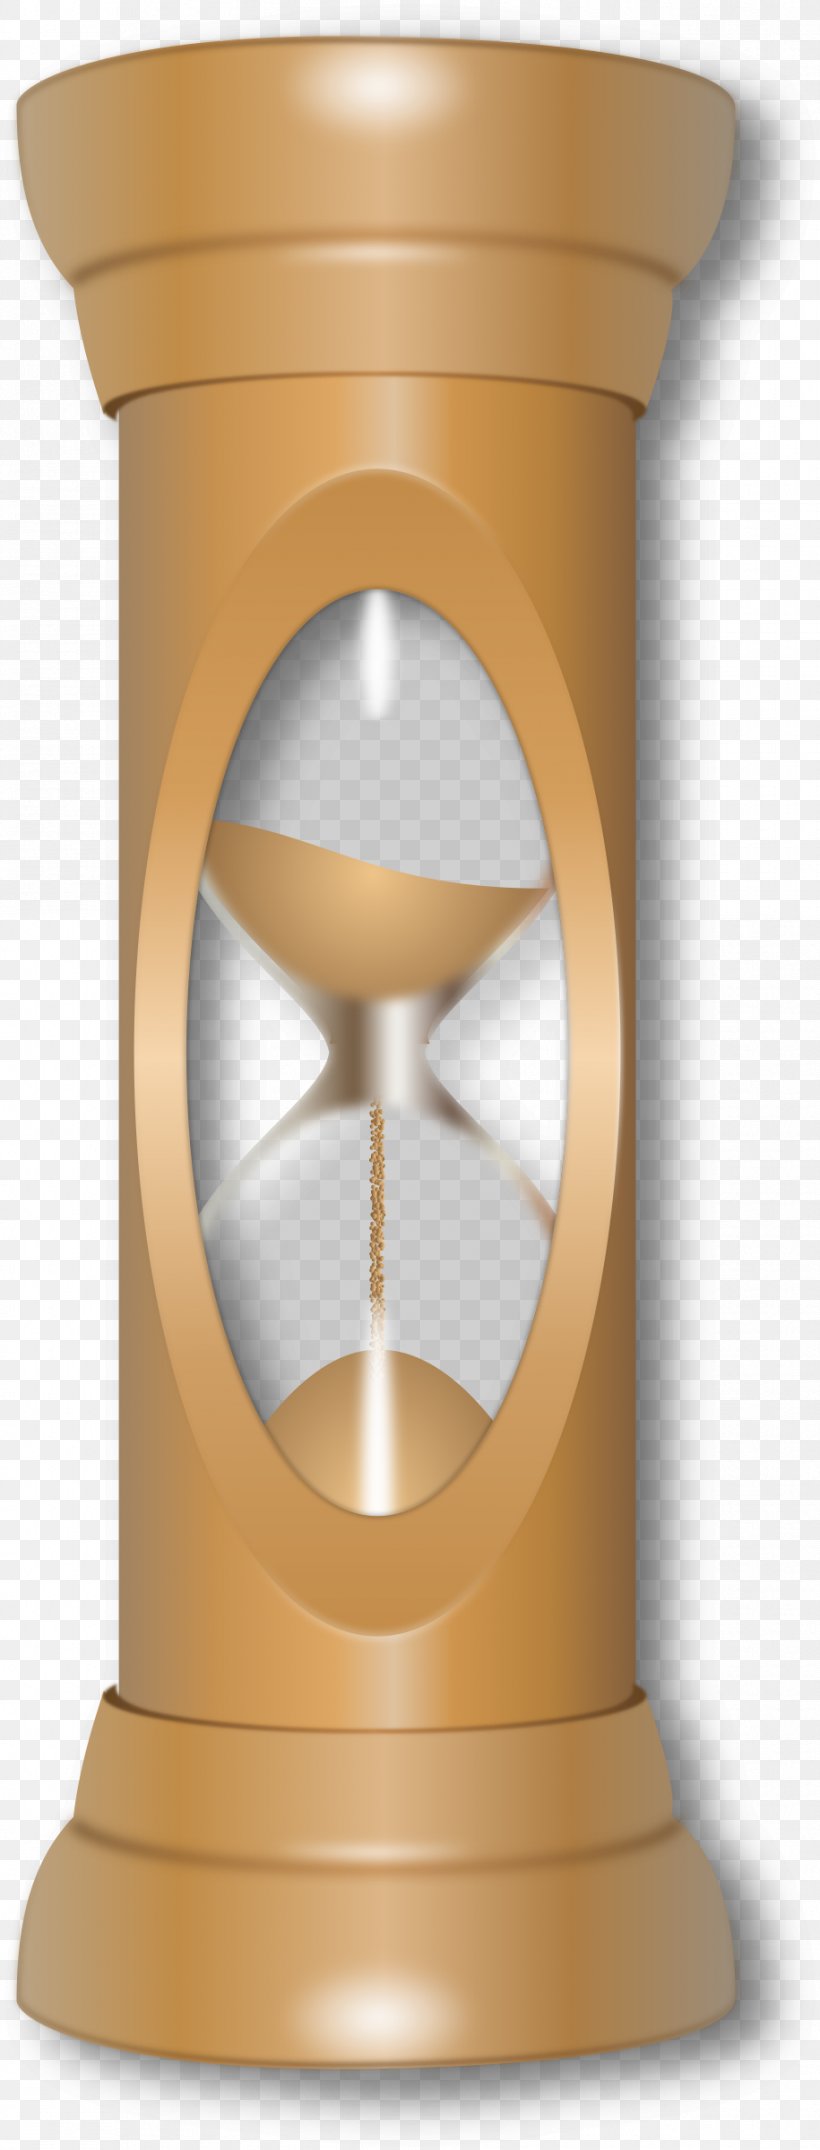 Hourglass Timer Clock Clip Art, PNG, 915x2400px, Hourglass, Clock, Cylinder, Time, Timer Download Free